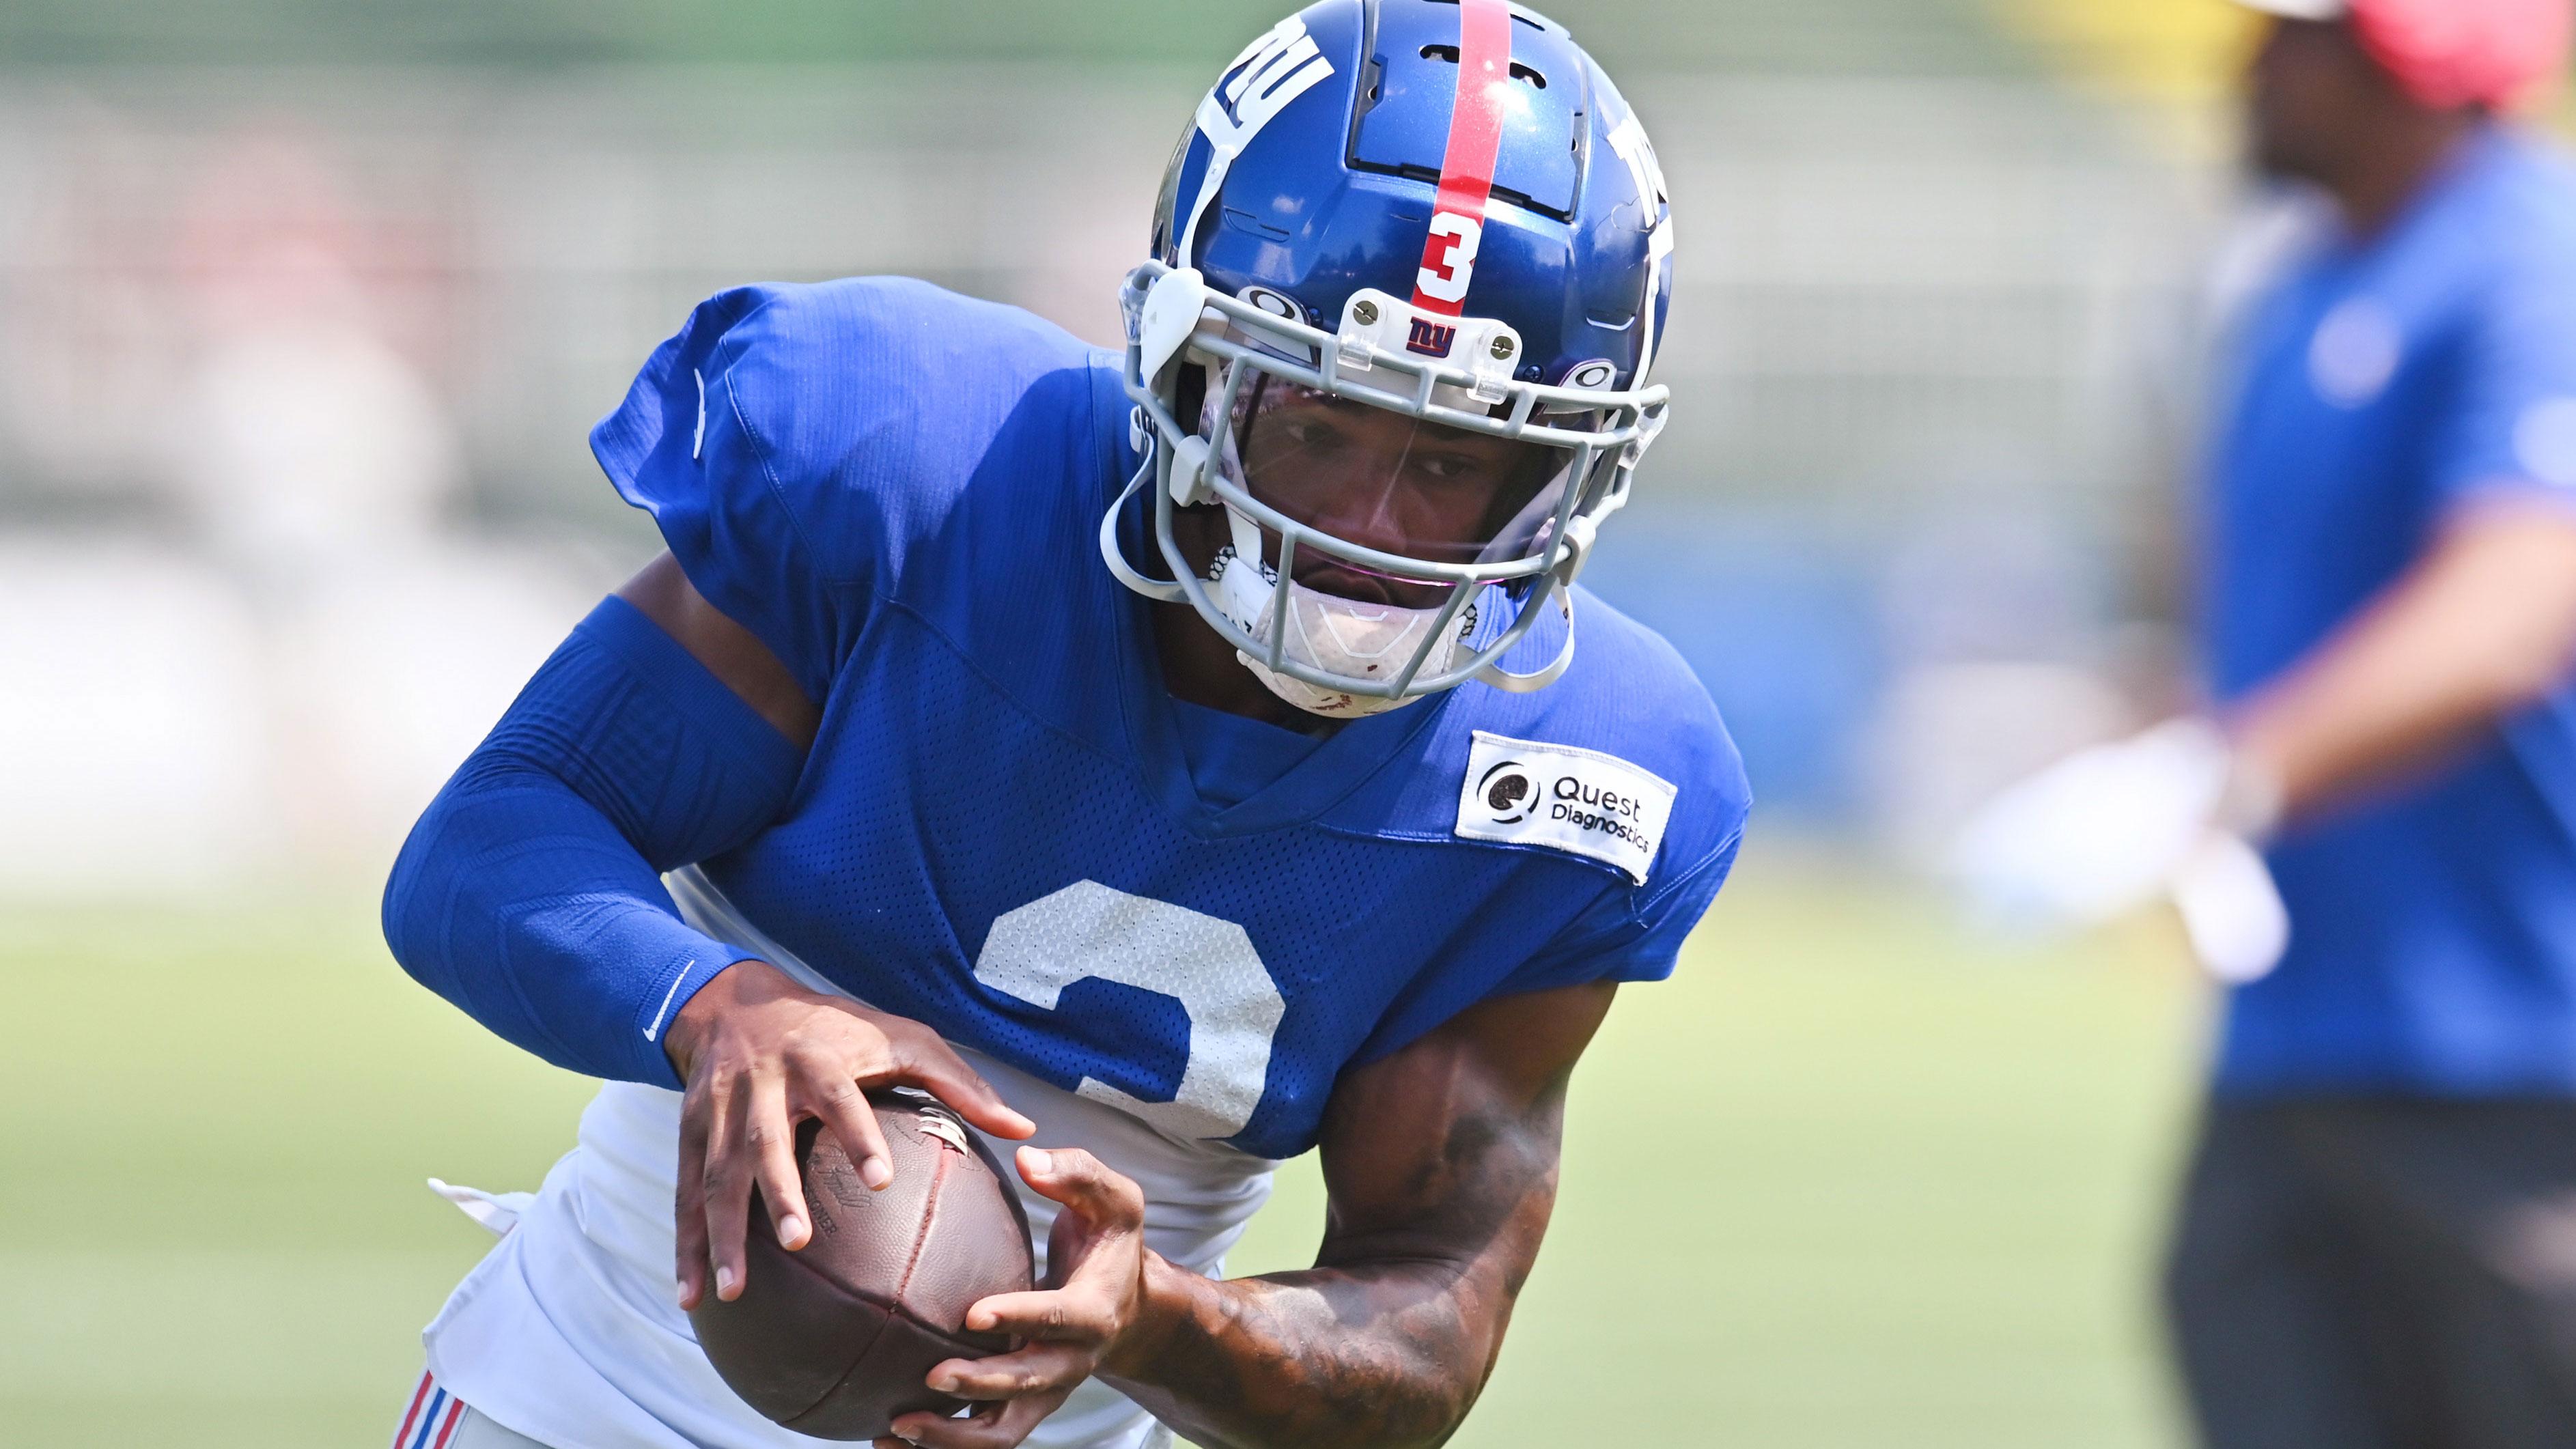 Aug 20, 2021; Berea, OH, USA; New York Giants wide receiver Sterling Shepard (3) catches a pass during a joint practice with the Cleveland Browns at CrossCountry Mortgage Campus. / Ken Blaze-USA TODAY Sports